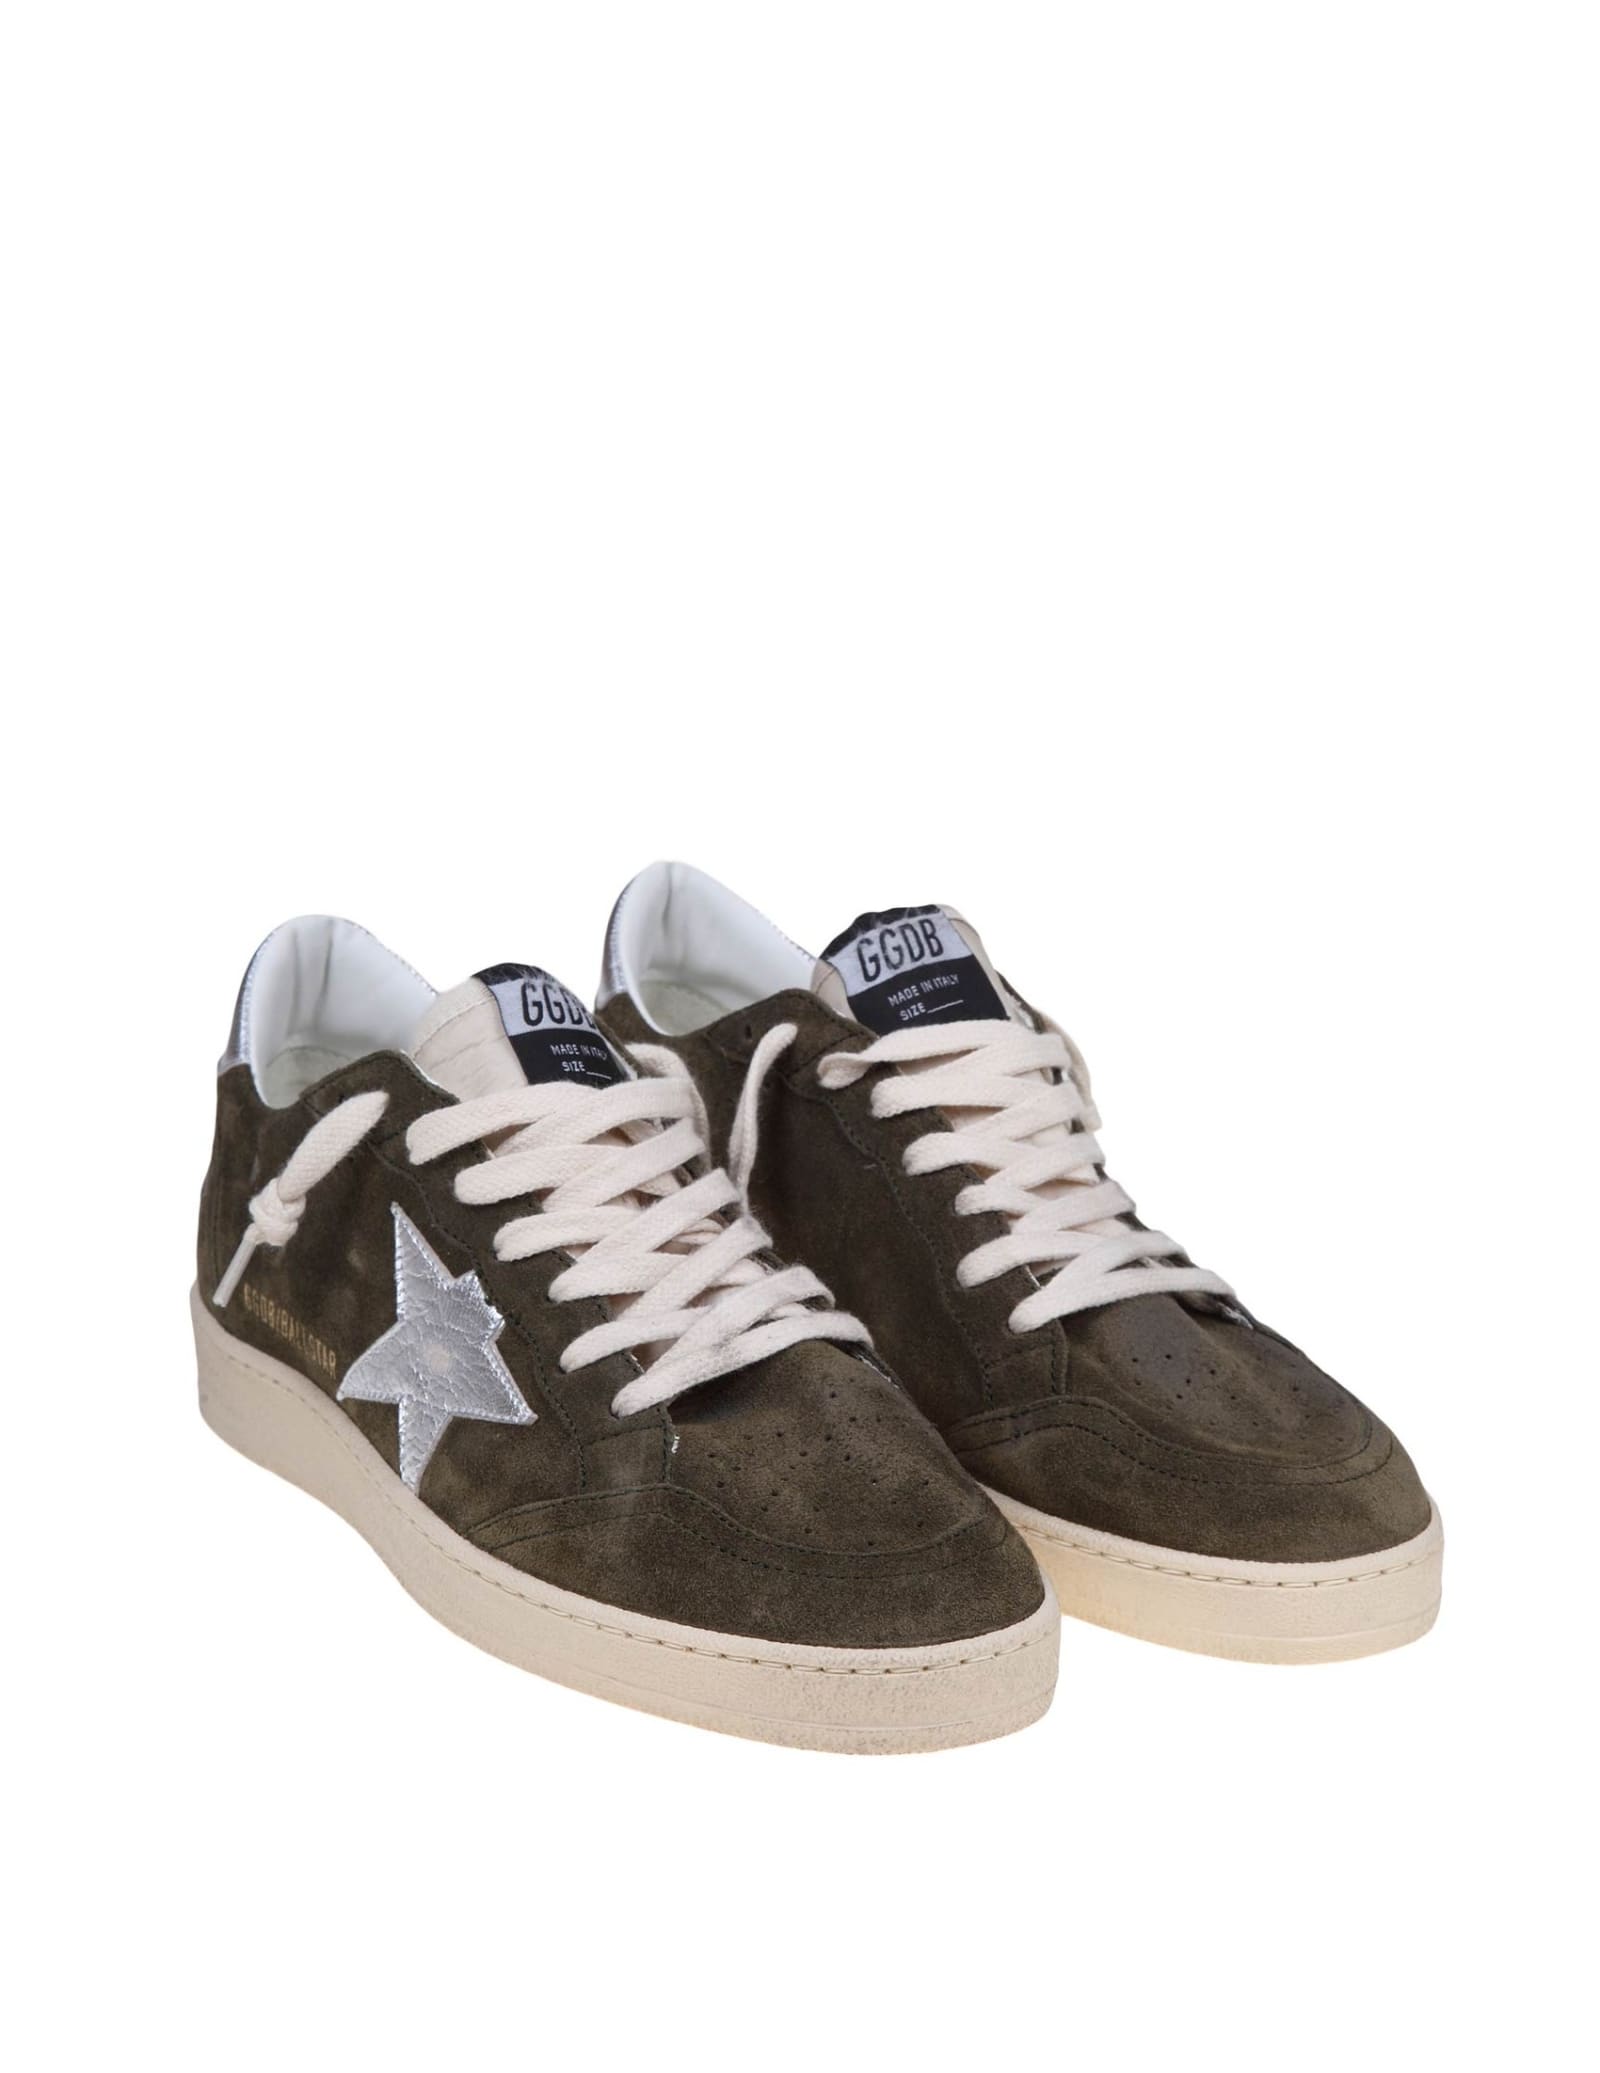 Shop Golden Goose Ball Star Sneakers In Olive Green Suede